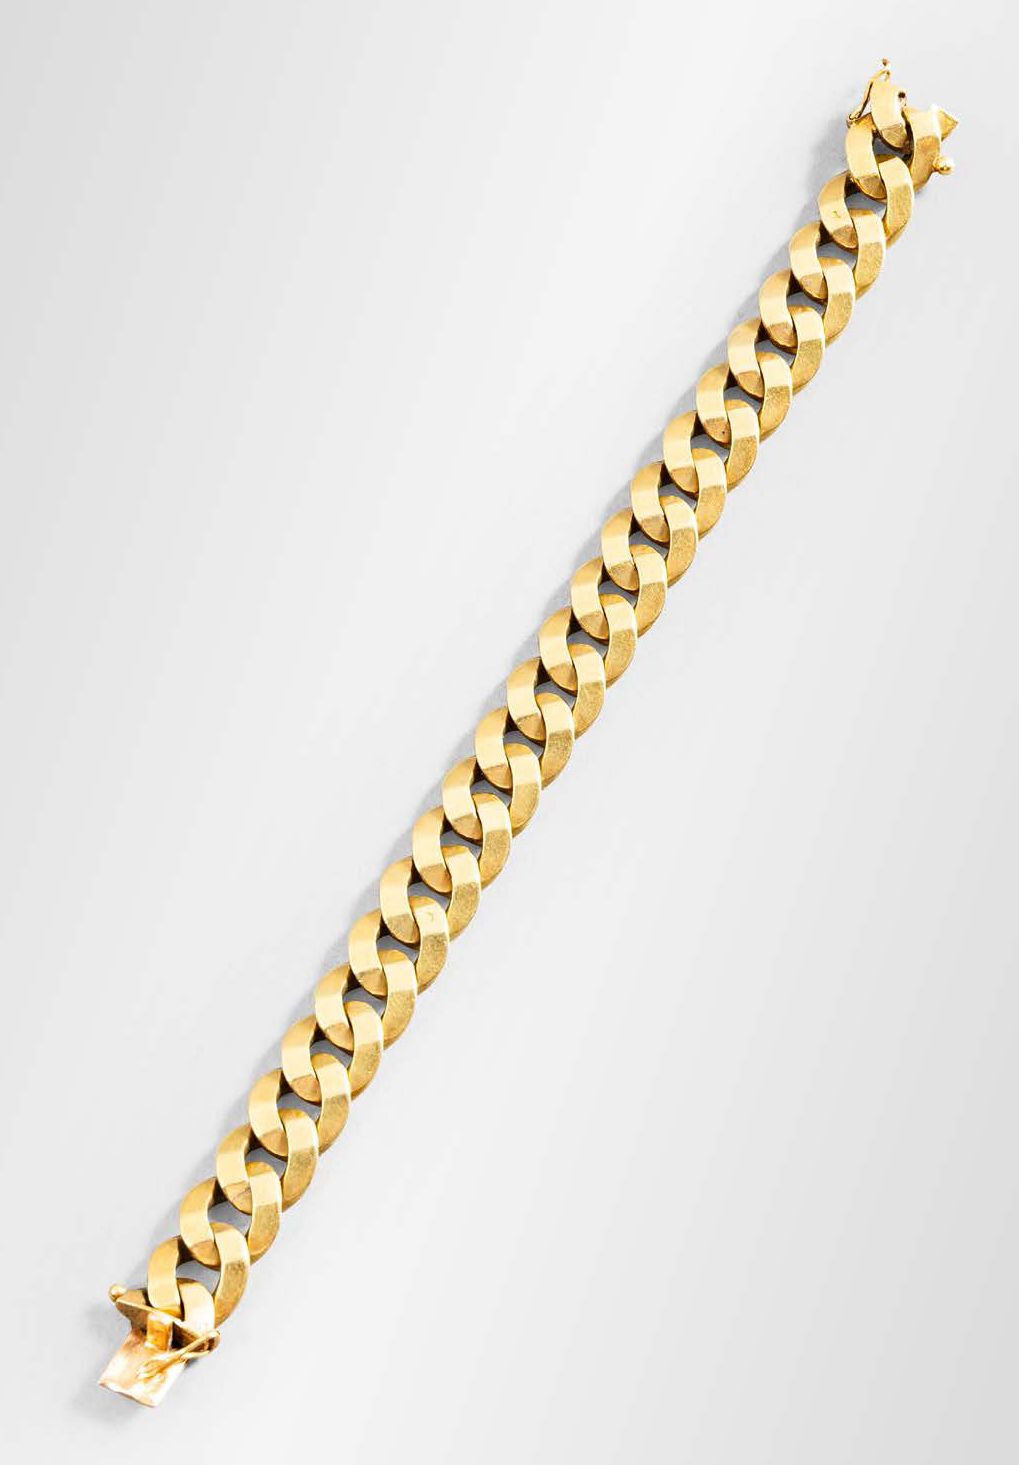 Null Gourmette bracelet in 750°/°° gold with flat links
L. 17 cm
Weight: 55.8 g